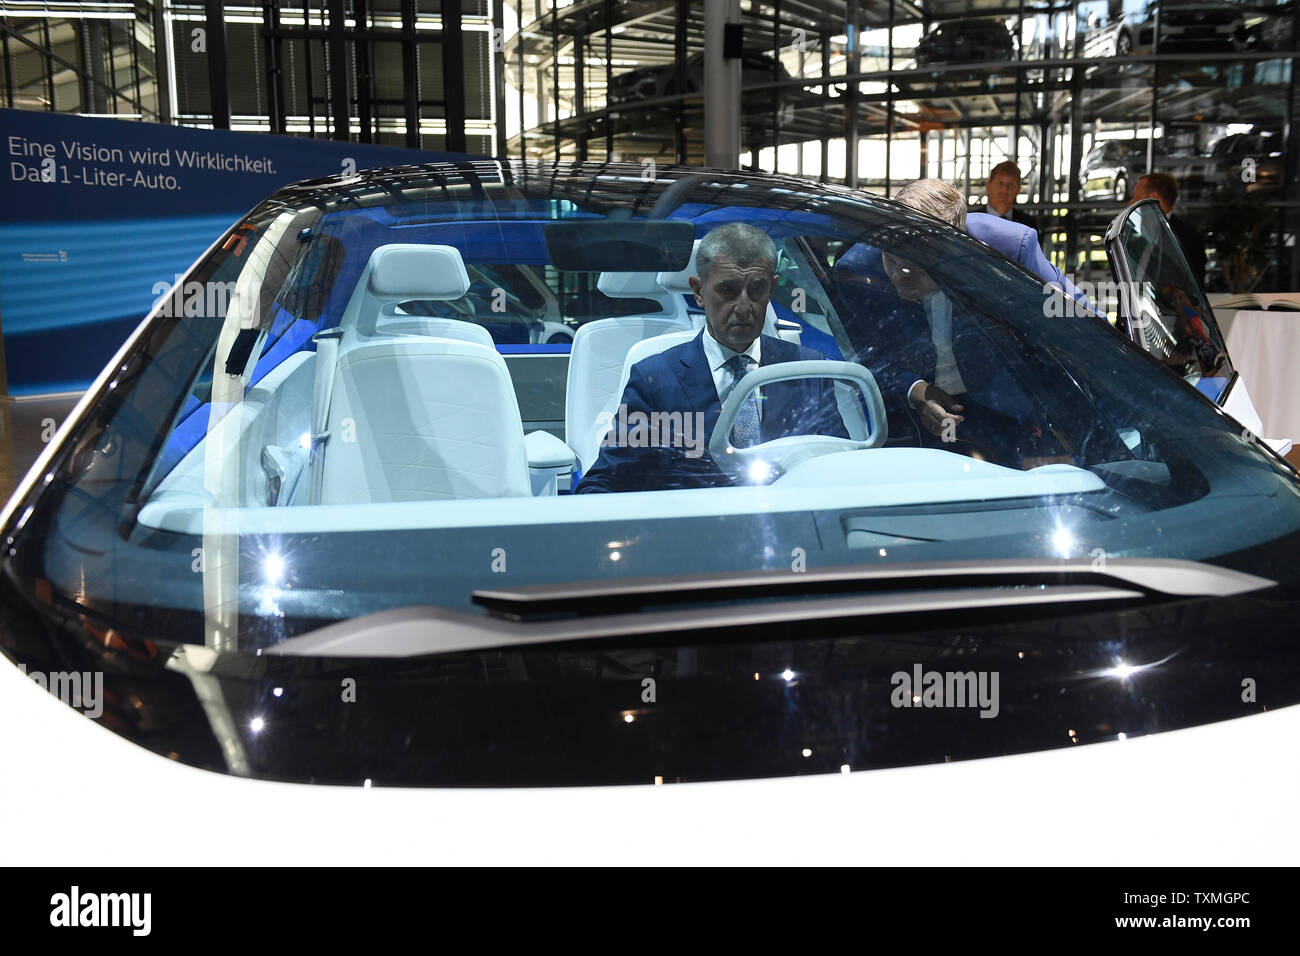 Drazdany, Germany. 25th June, 2019. Czech Prime Minister Andrej Babis, center, visits a Volkswagen plant in Dresden, Germany, on June 25, 2019. On the photo is seen a Showcard ID concept and Director of the plant Lars Dittert, right. Credit: Ondrej Deml/CTK Photo/Alamy Live News Stock Photo